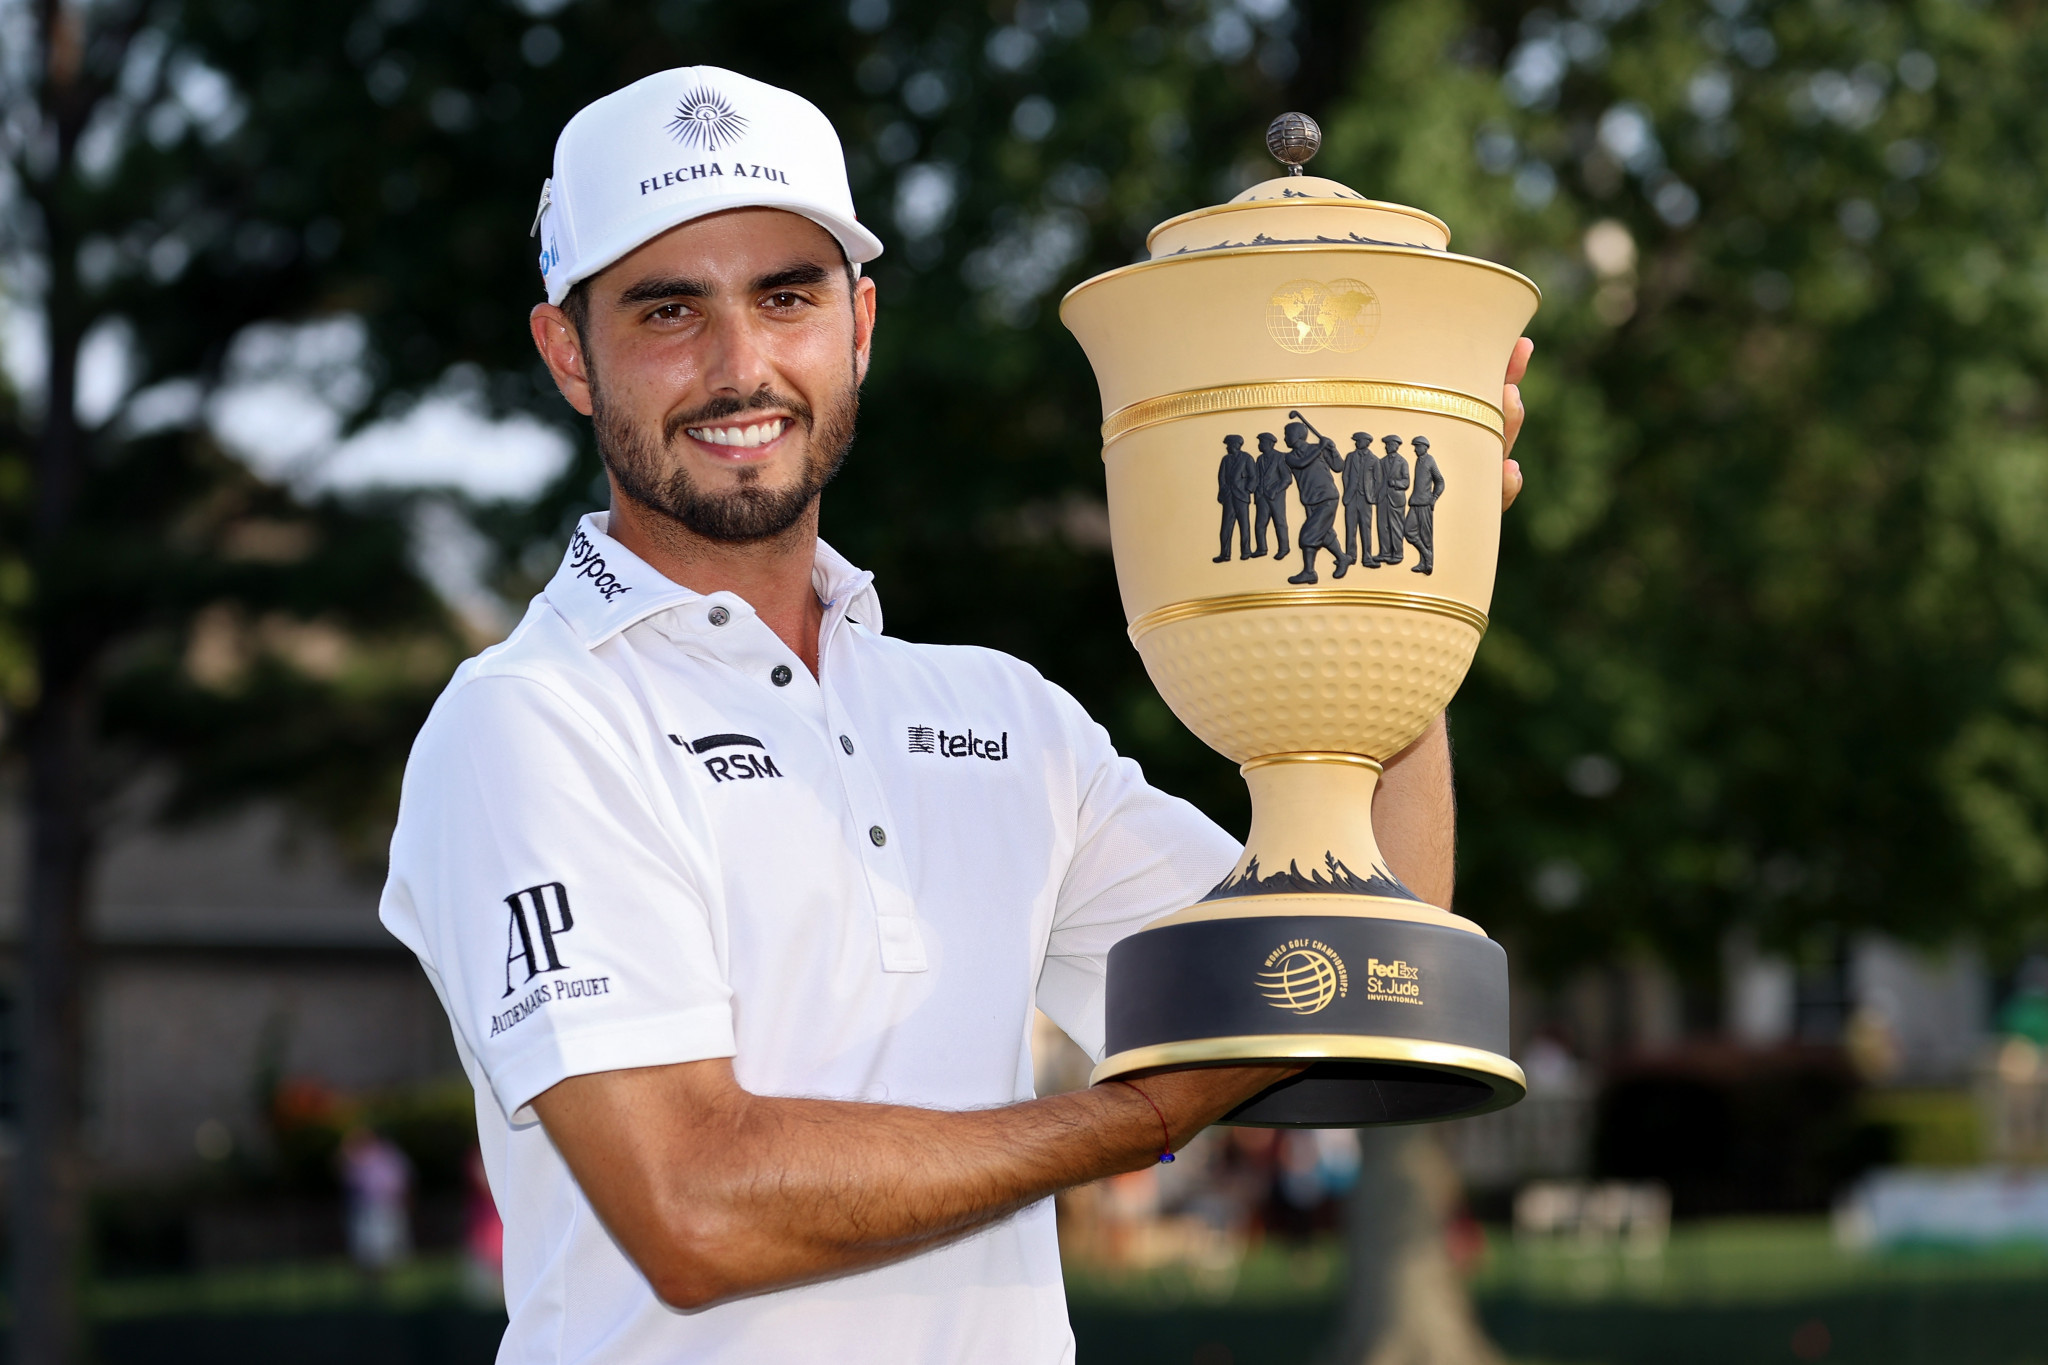 Abraham Ancer clinched his first Tour victory with his triumph at the World Golf Championships (WGC)-FedEx St. Jude Invitational ©Getty Images